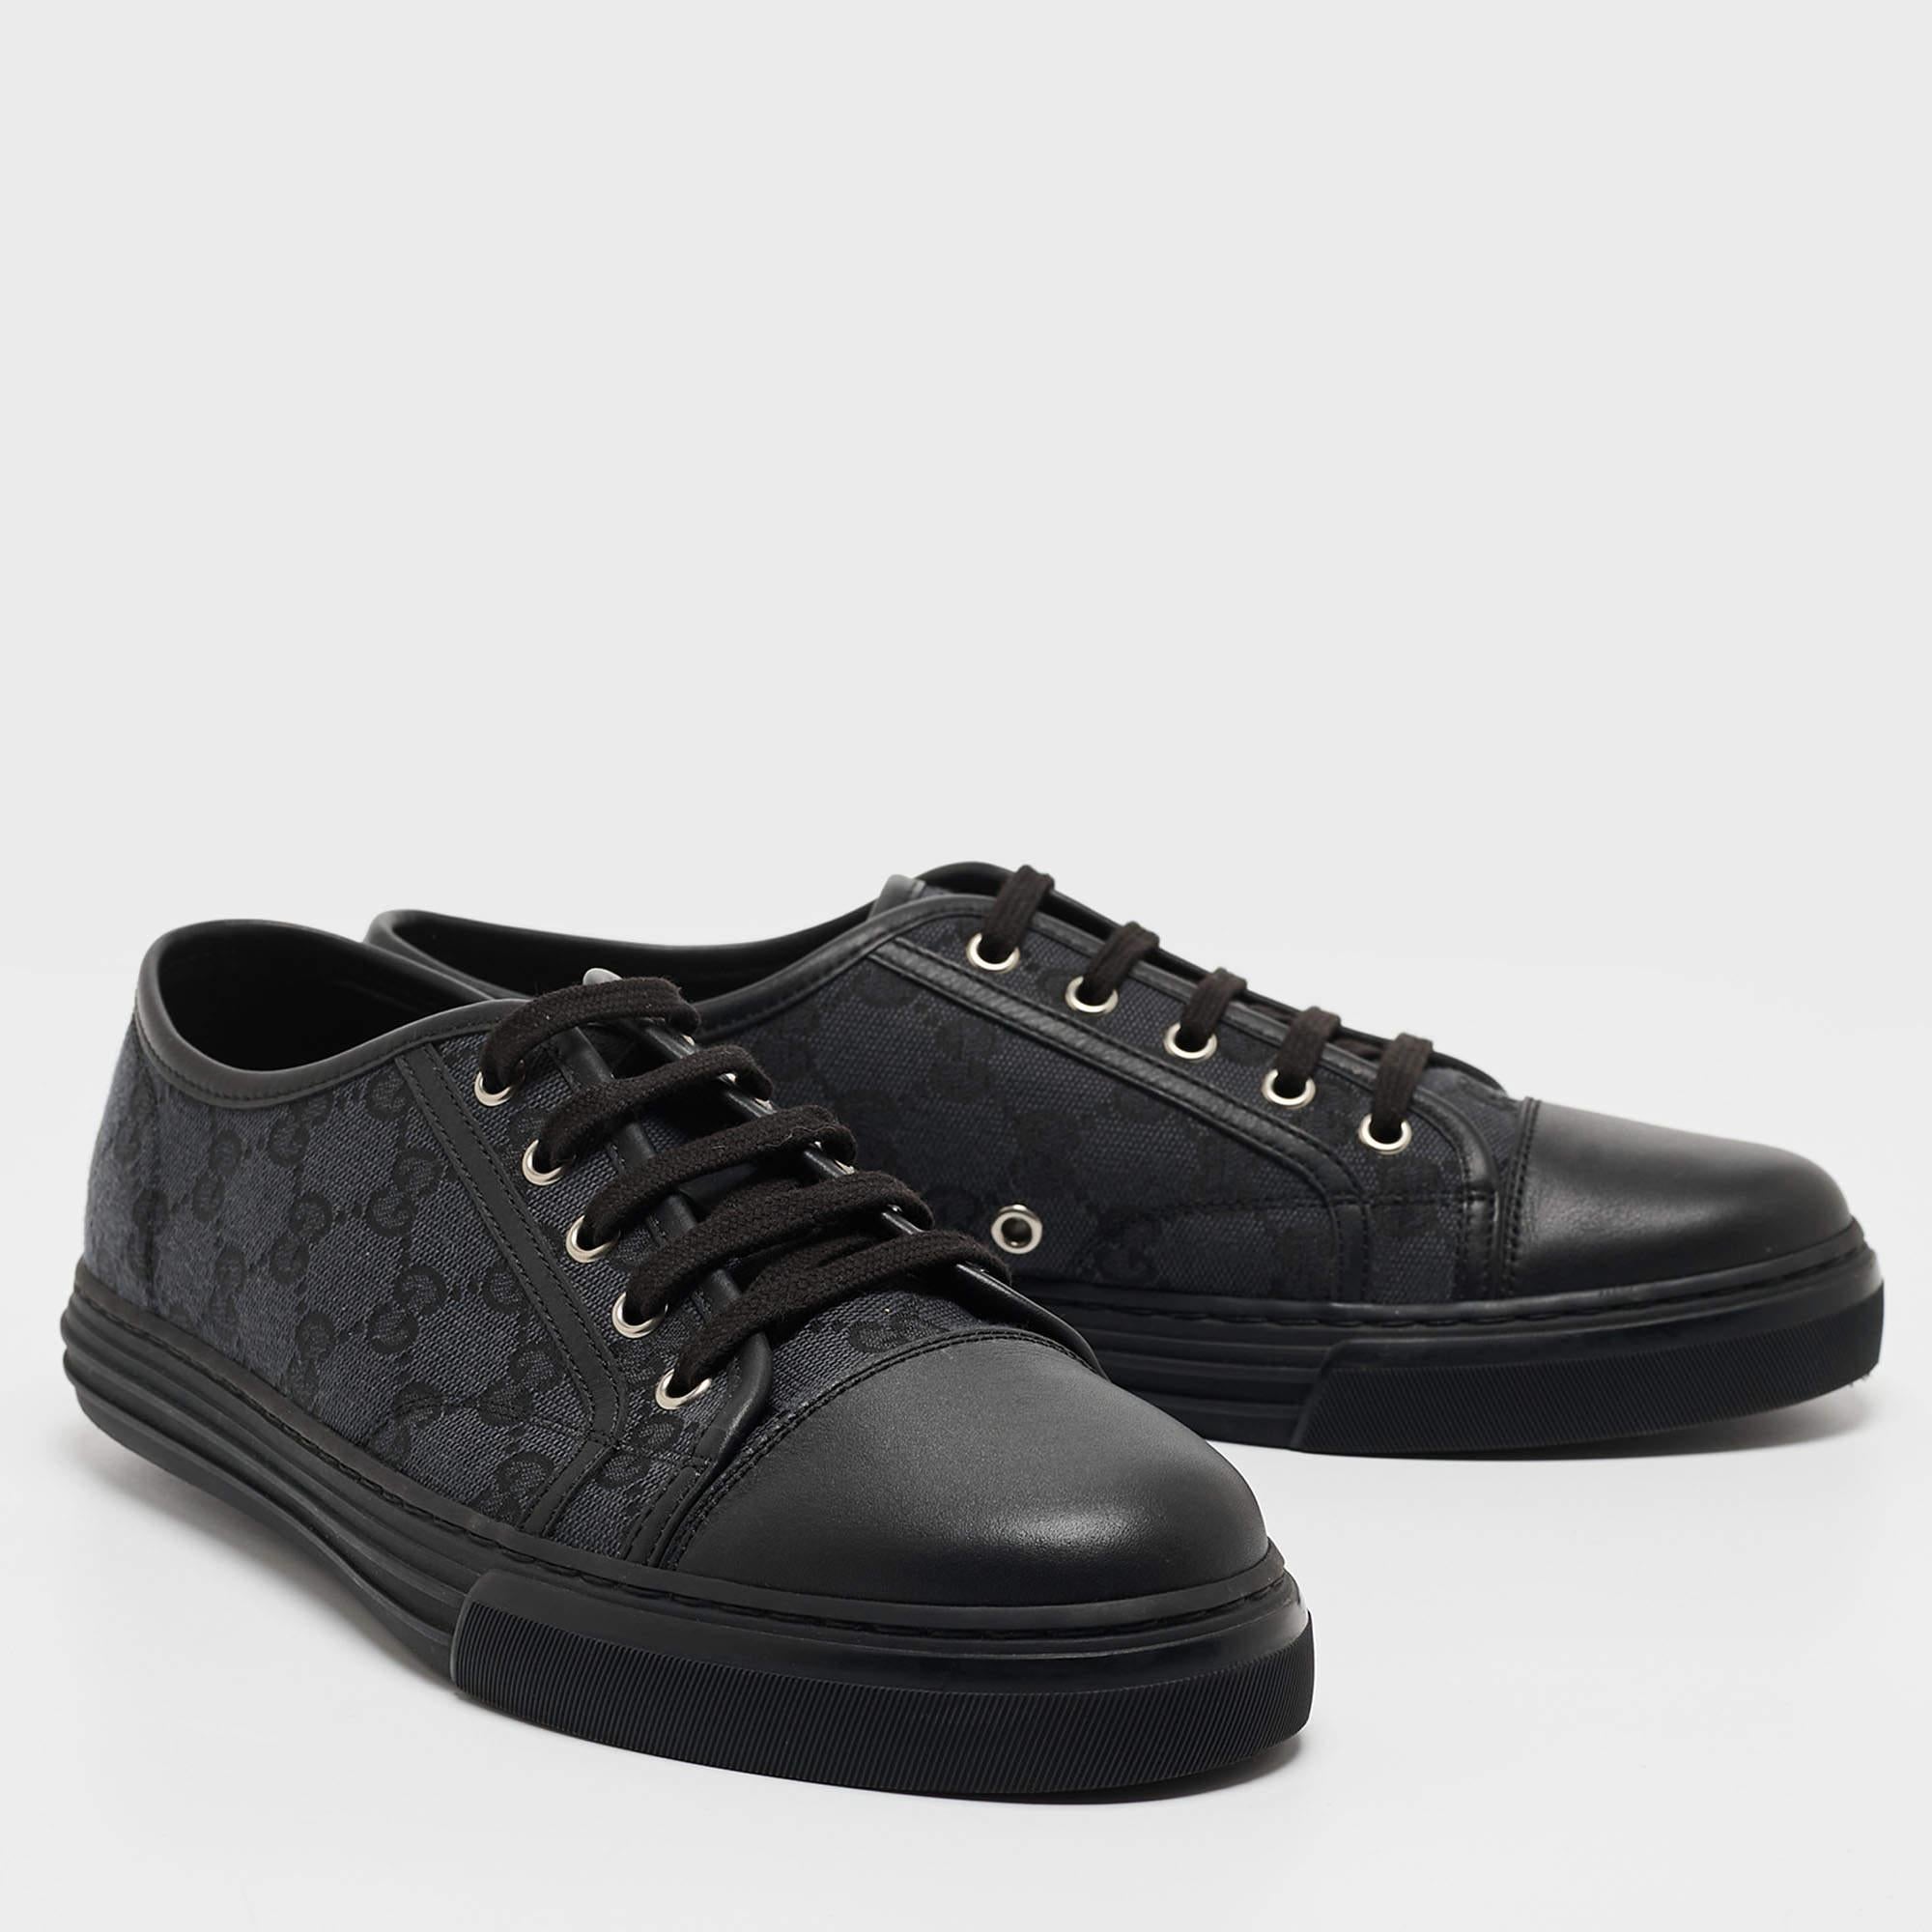 Gucci Black GG Canvas and Leather Low Top Sneakers Size 41.5 1